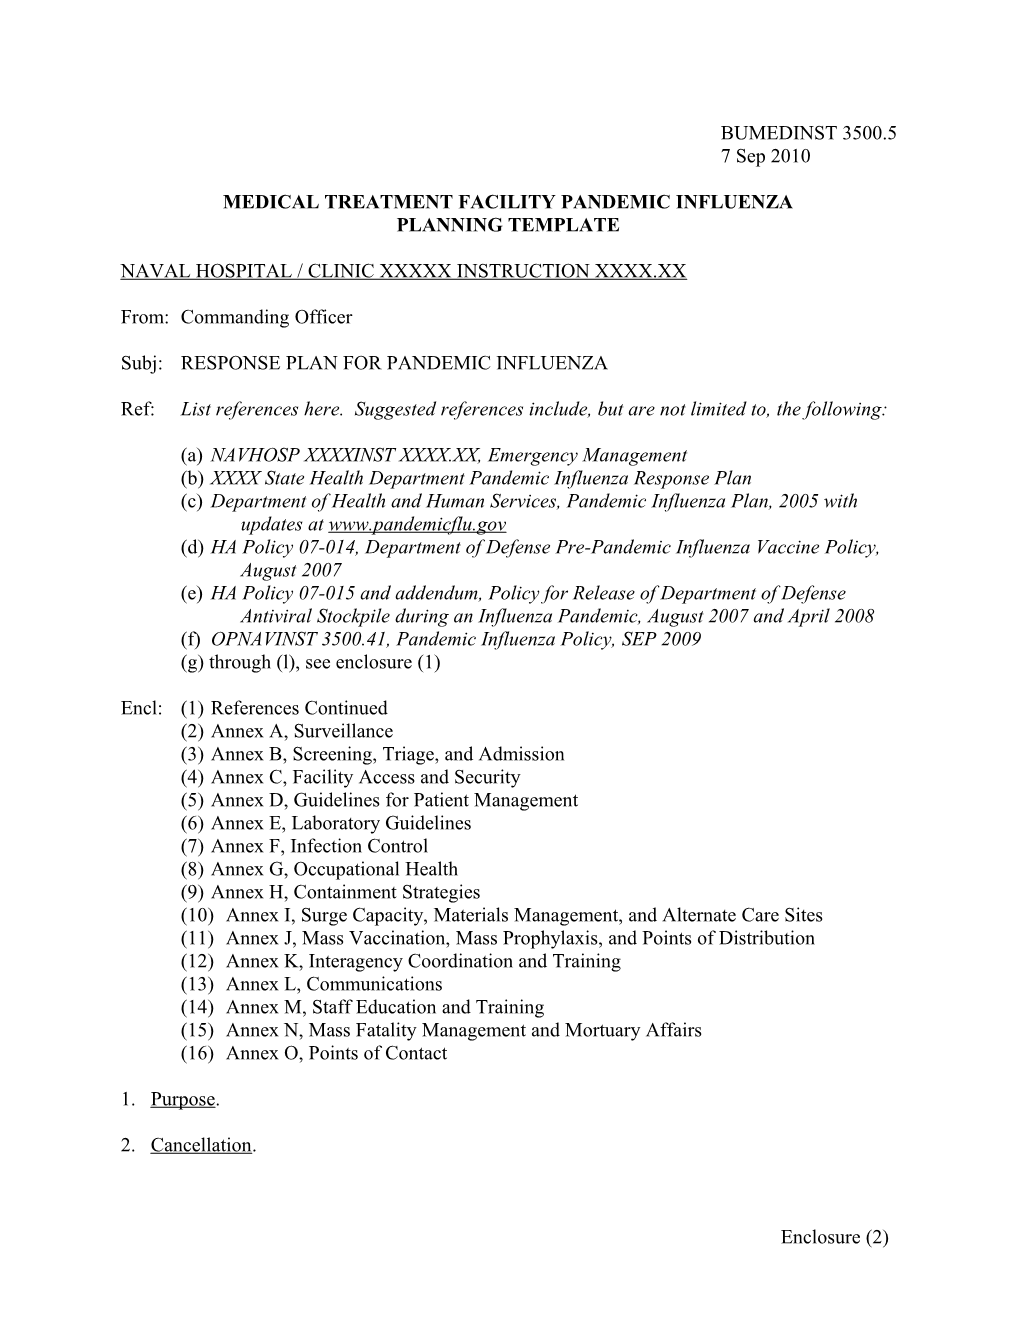 Medical Treatment Facility Pandemic Influenza Planning Template